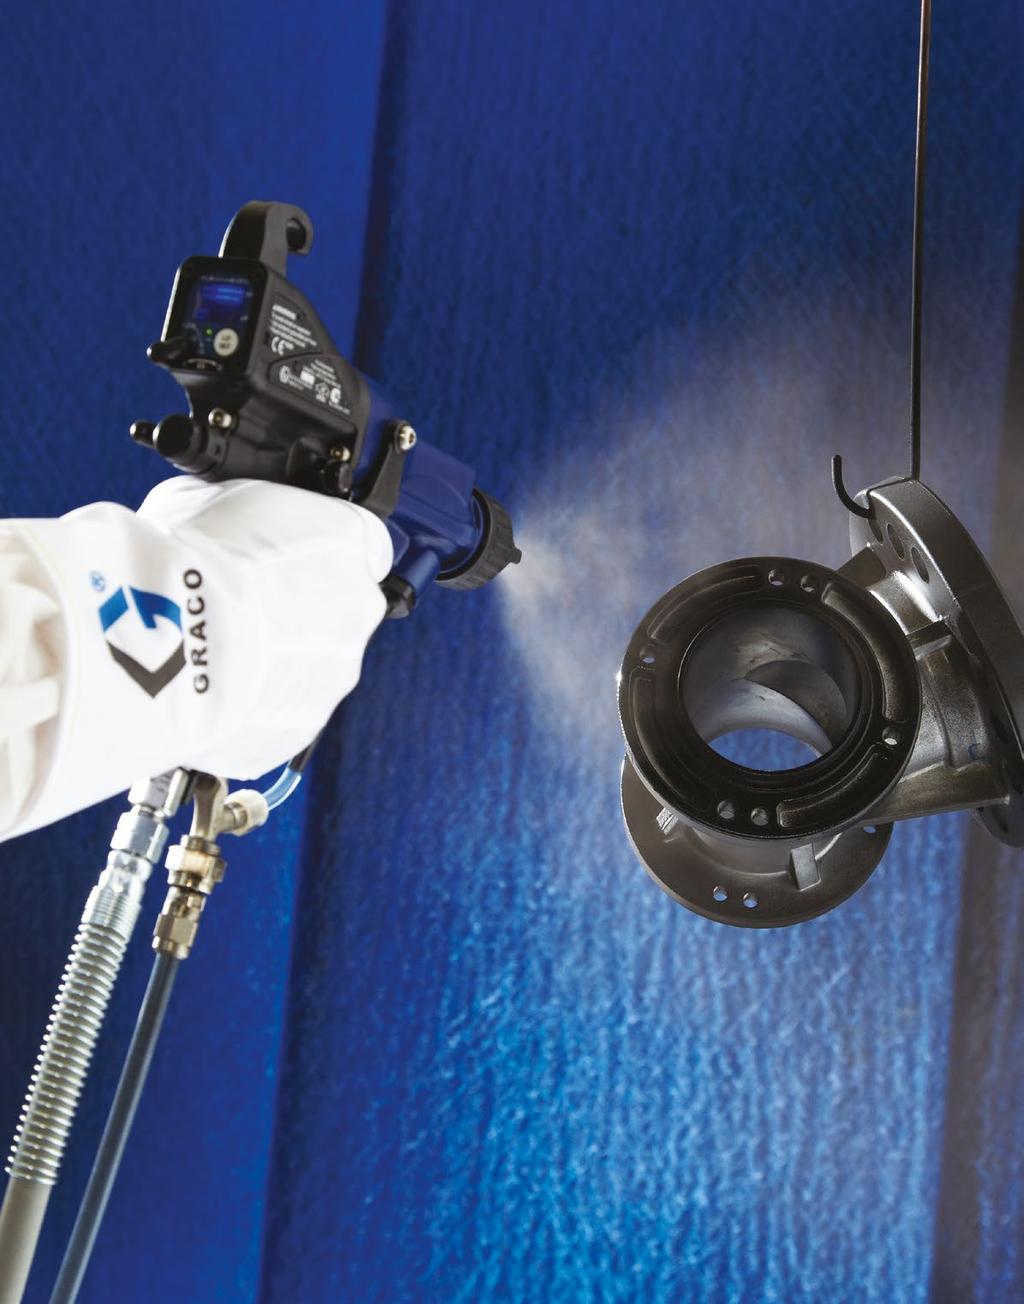 Choose PRO Xp Experienced Painters rely on Expert Performance Pro Xp We took our trademark, high performing Electrostatic Spray Guns and made them better.